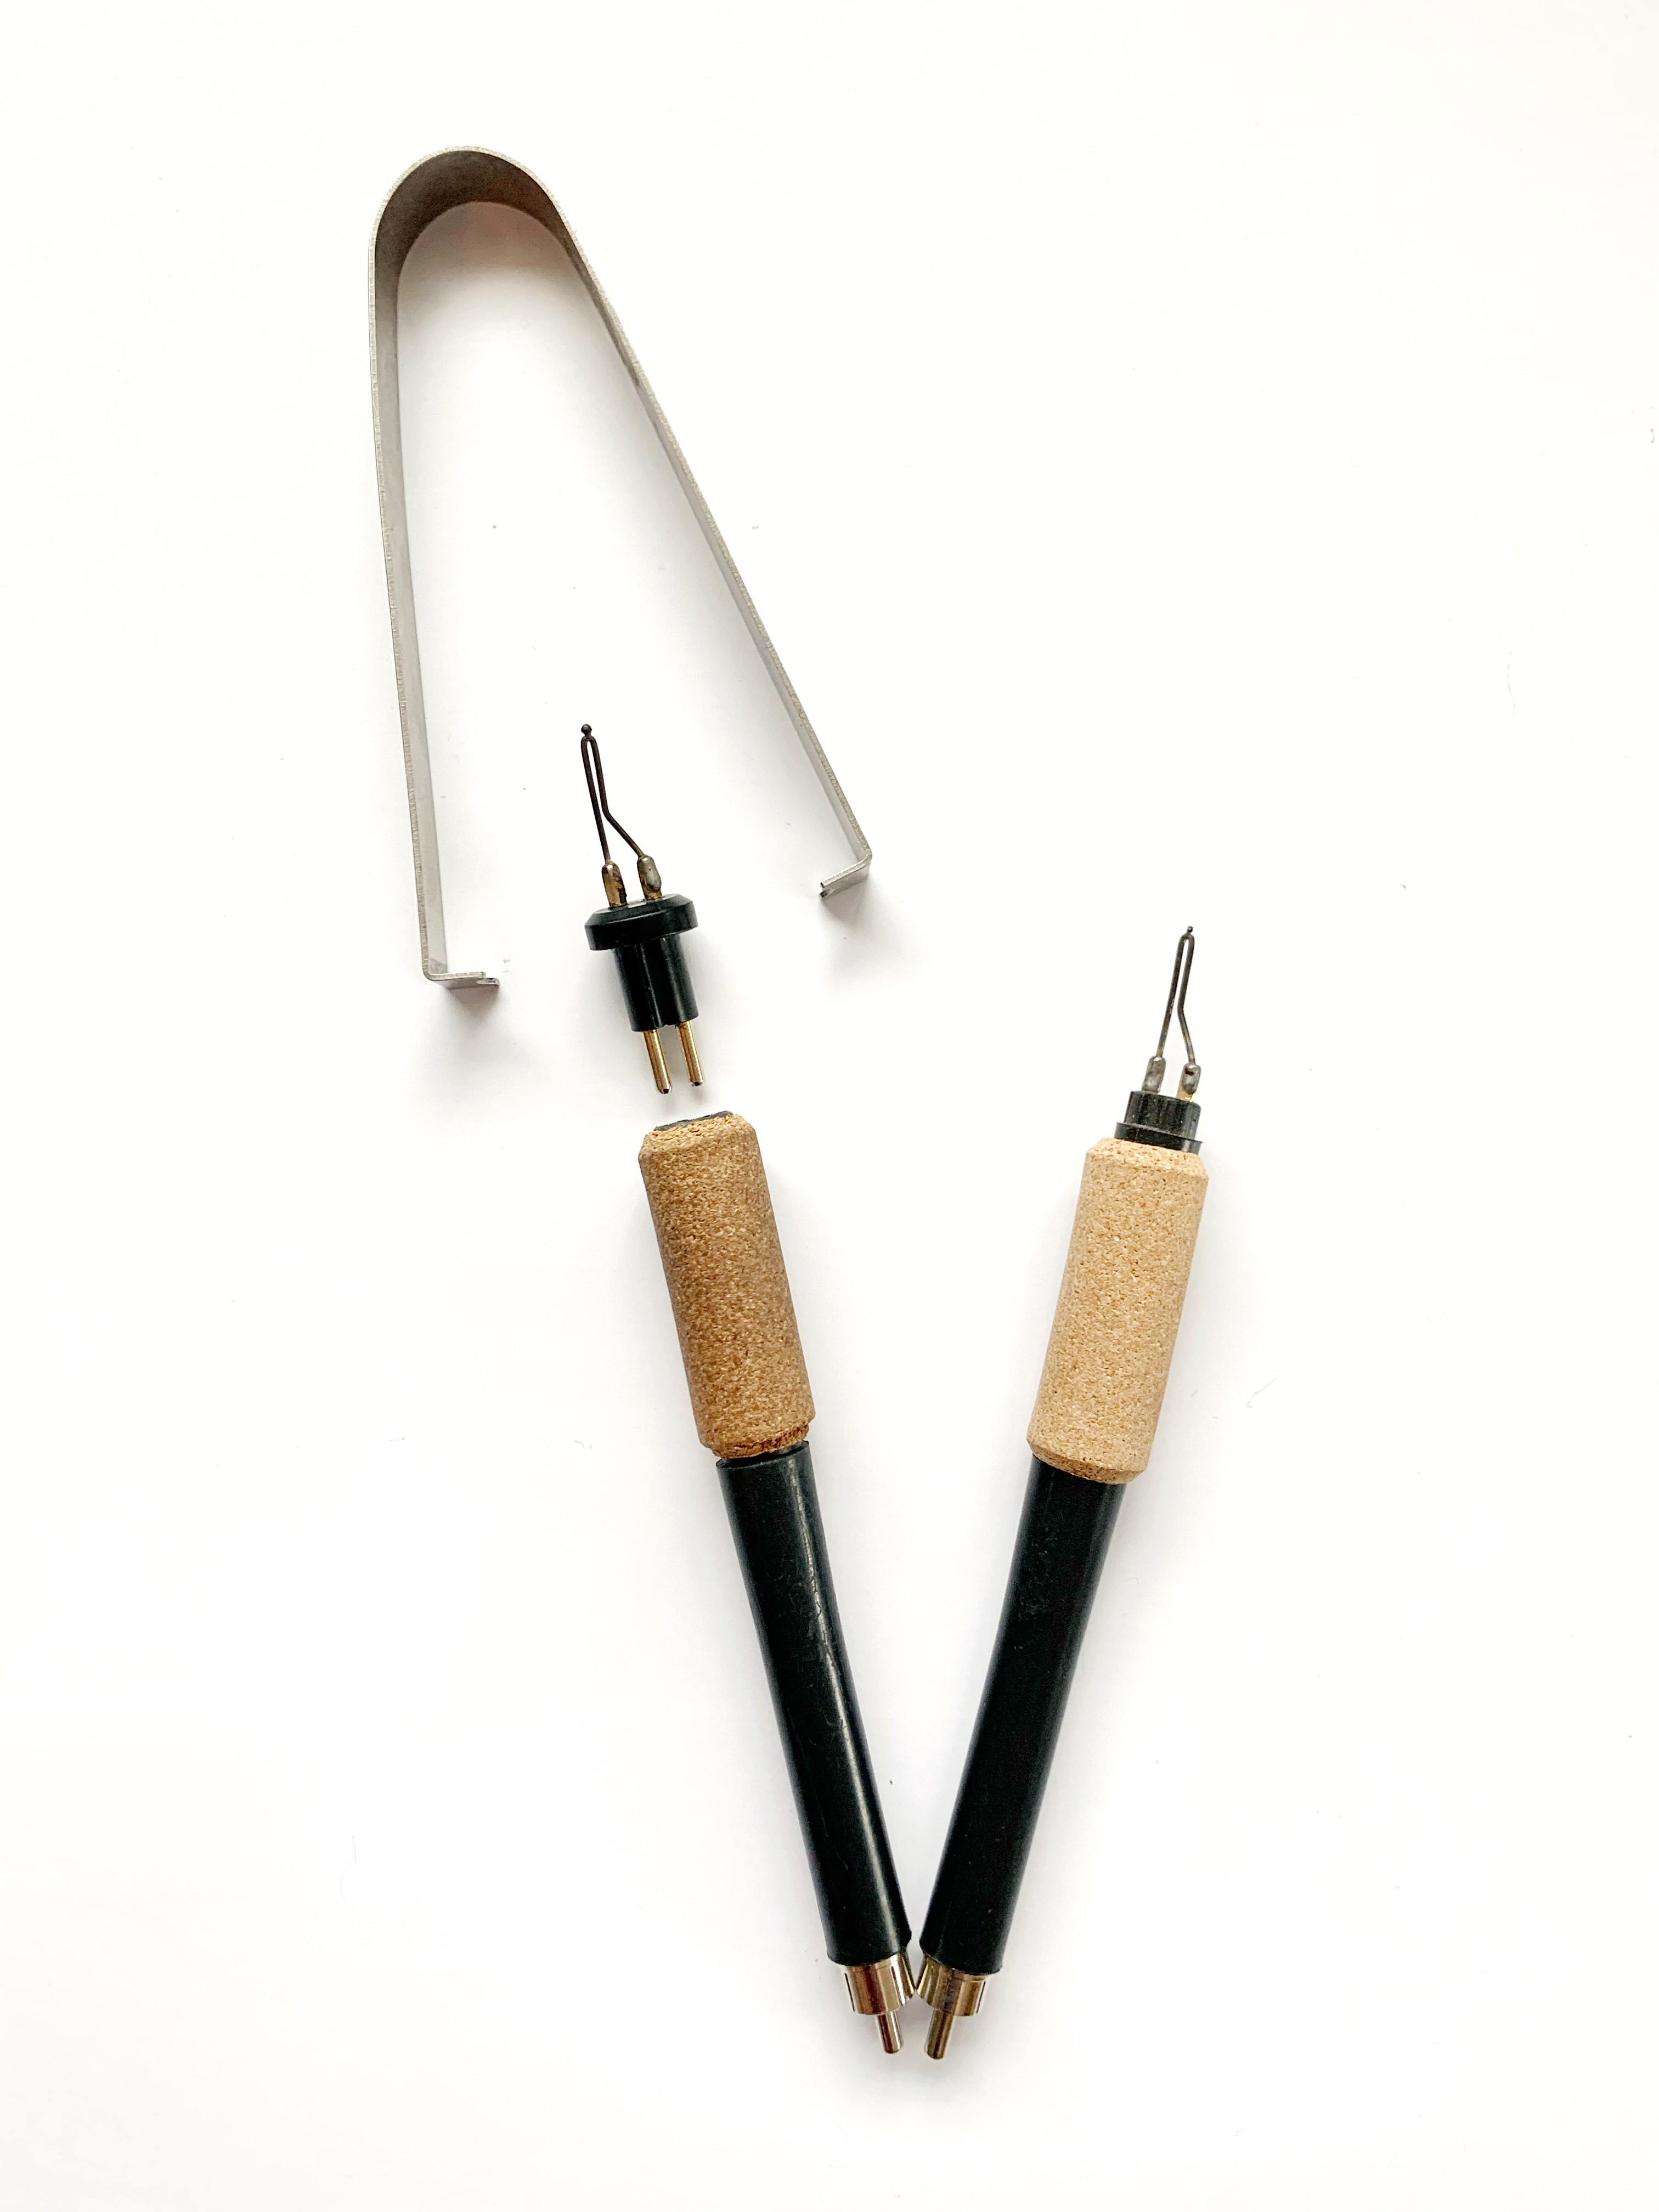 WIRE NIB #8: Woodburning Tips And Their Uses - Quill Nib 